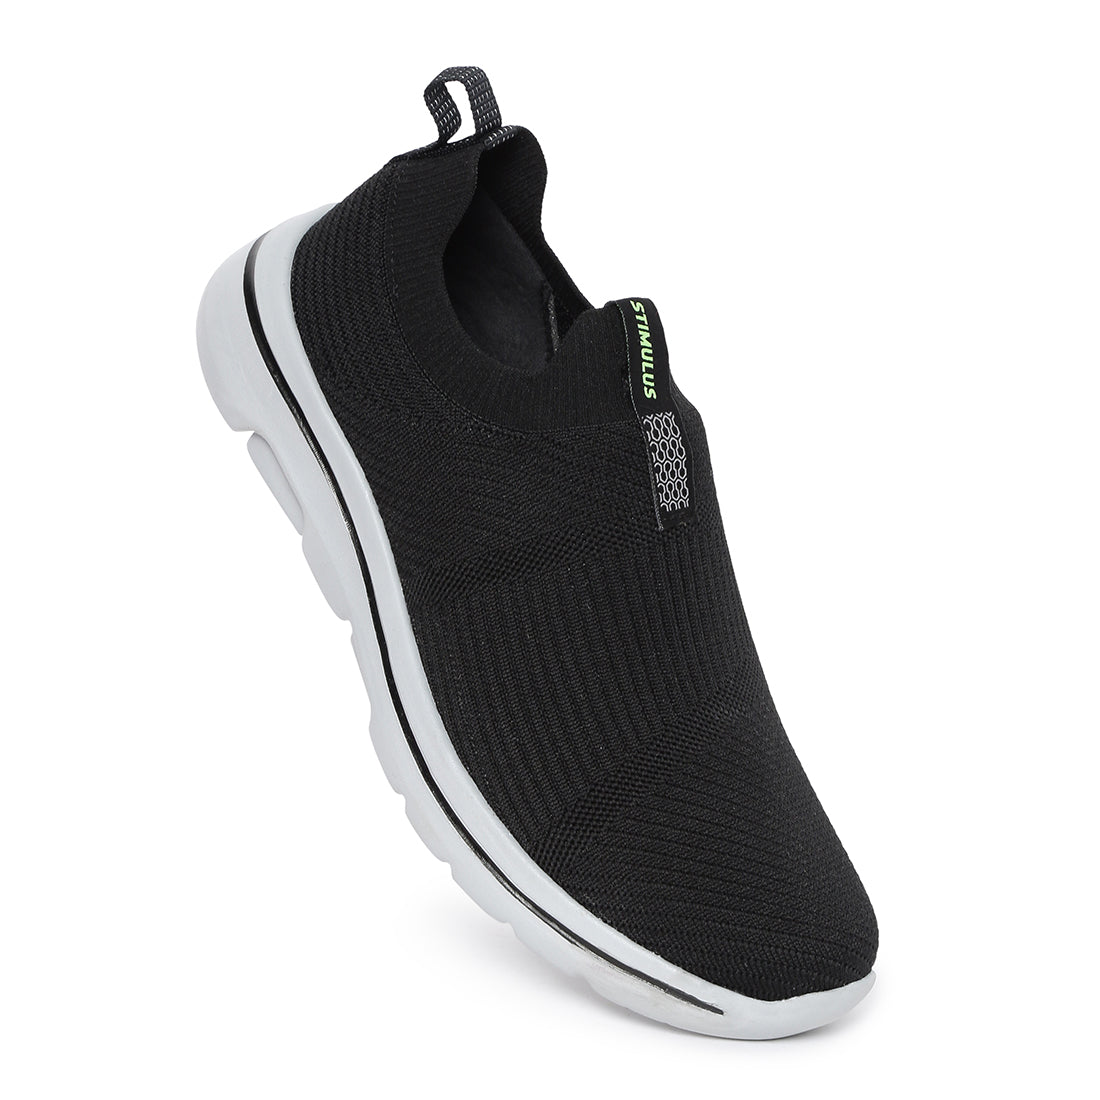 Paragon Stimulus Casual Black Knitted Training Shoes for Men